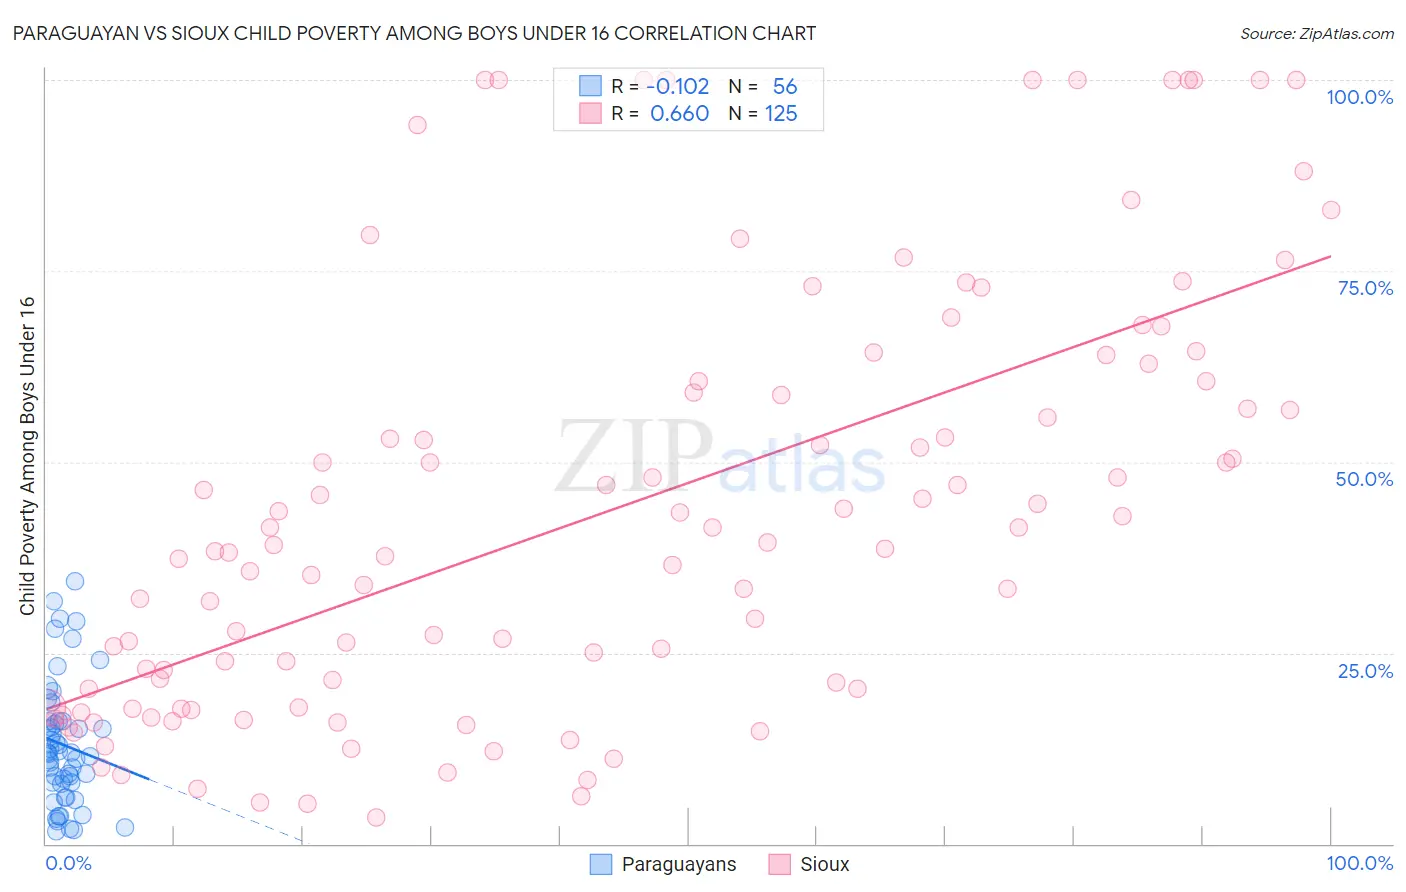 Paraguayan vs Sioux Child Poverty Among Boys Under 16